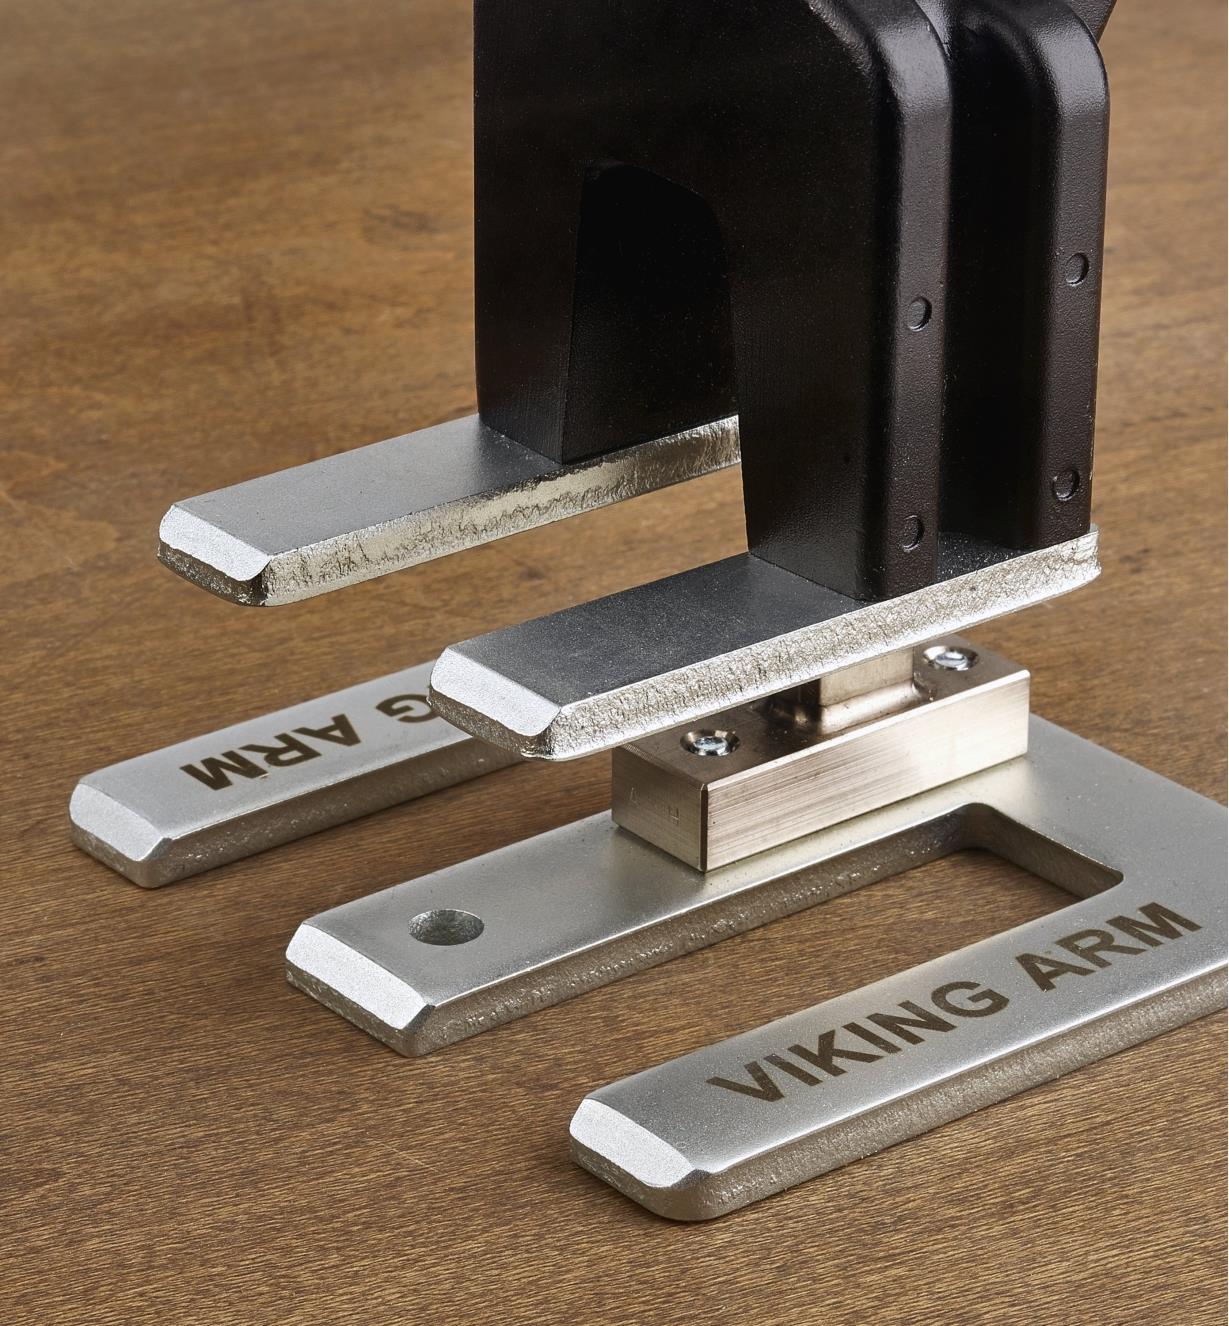 A close view of the Viking Arm assembly jack lift bars, showing the bevelled edges